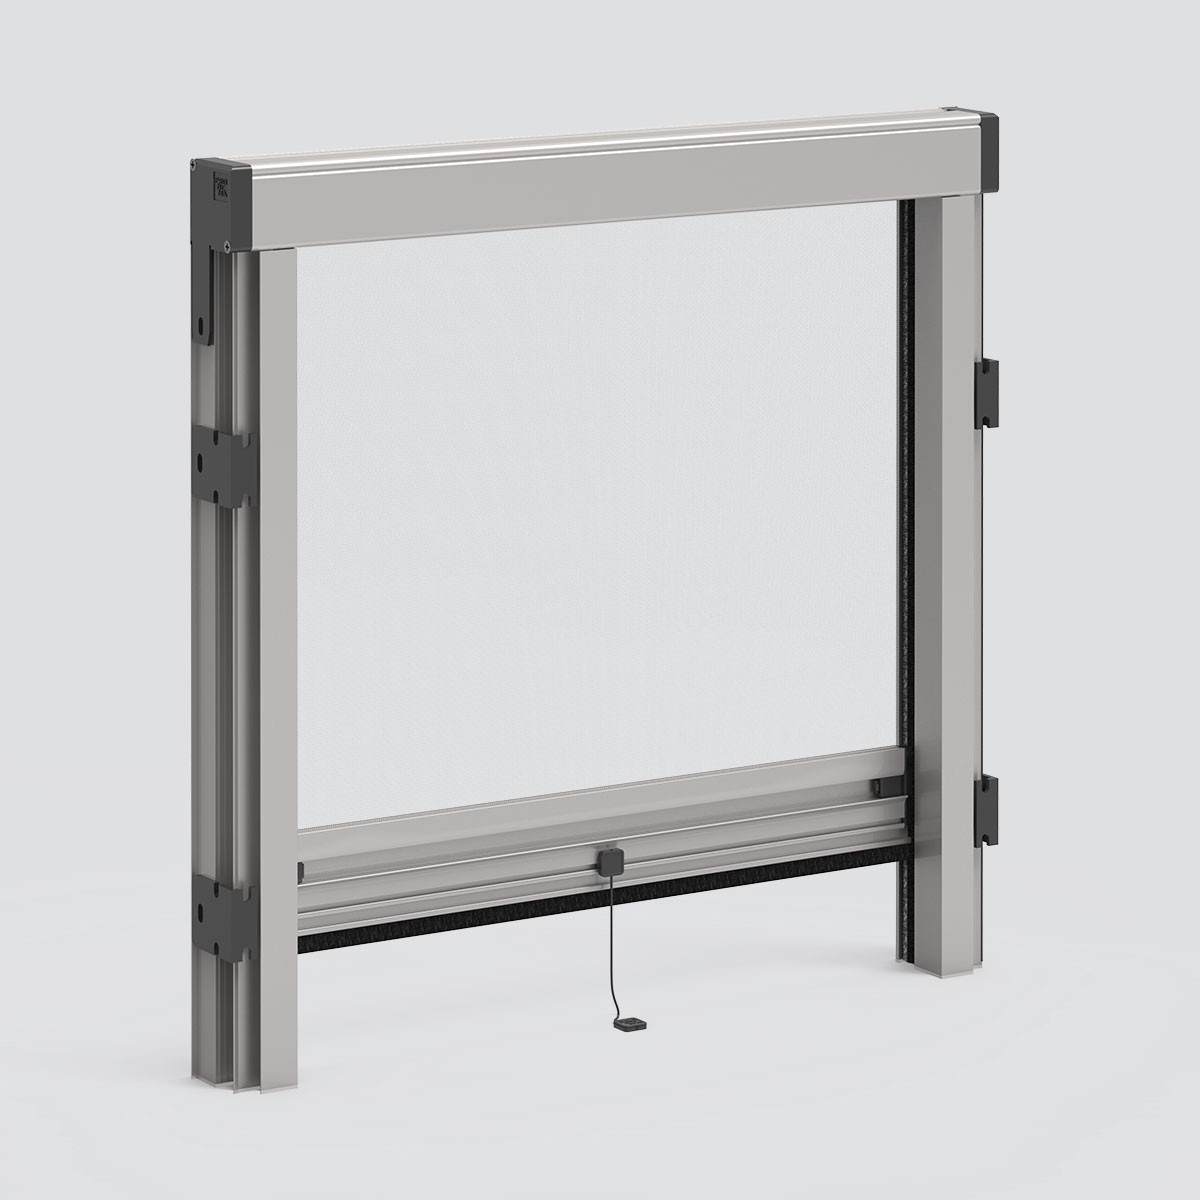 Incasso Verticale, 46i Plus. Spring-operated vertical 46i Plus insect screen. Bracket guides.